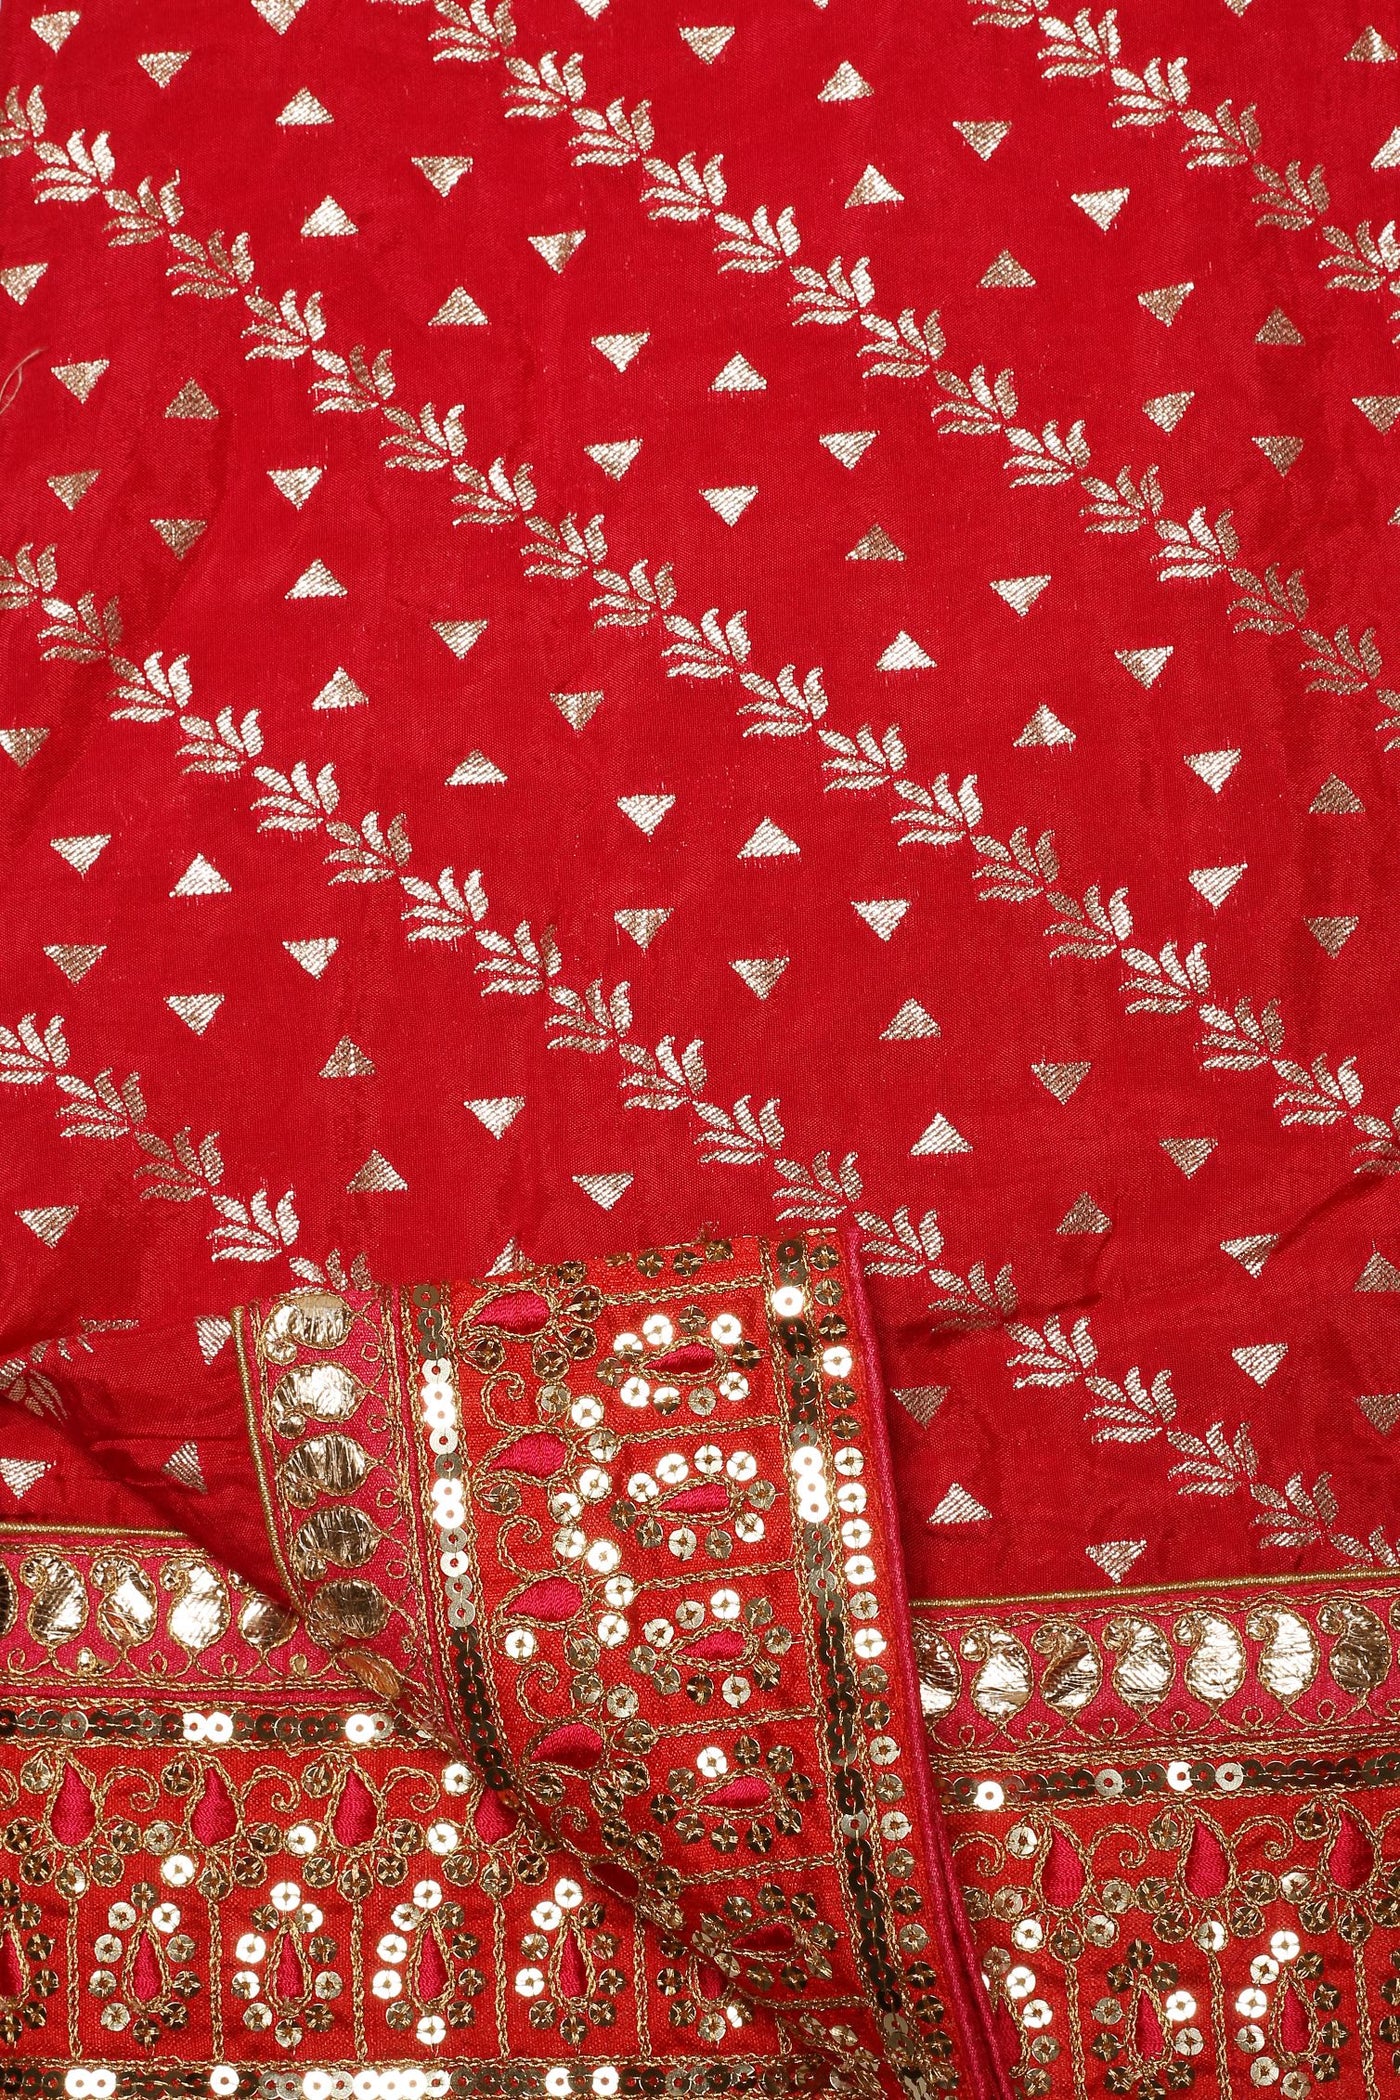 Radiant Pink and Red Bandhani Saree with Gota and Thread Work